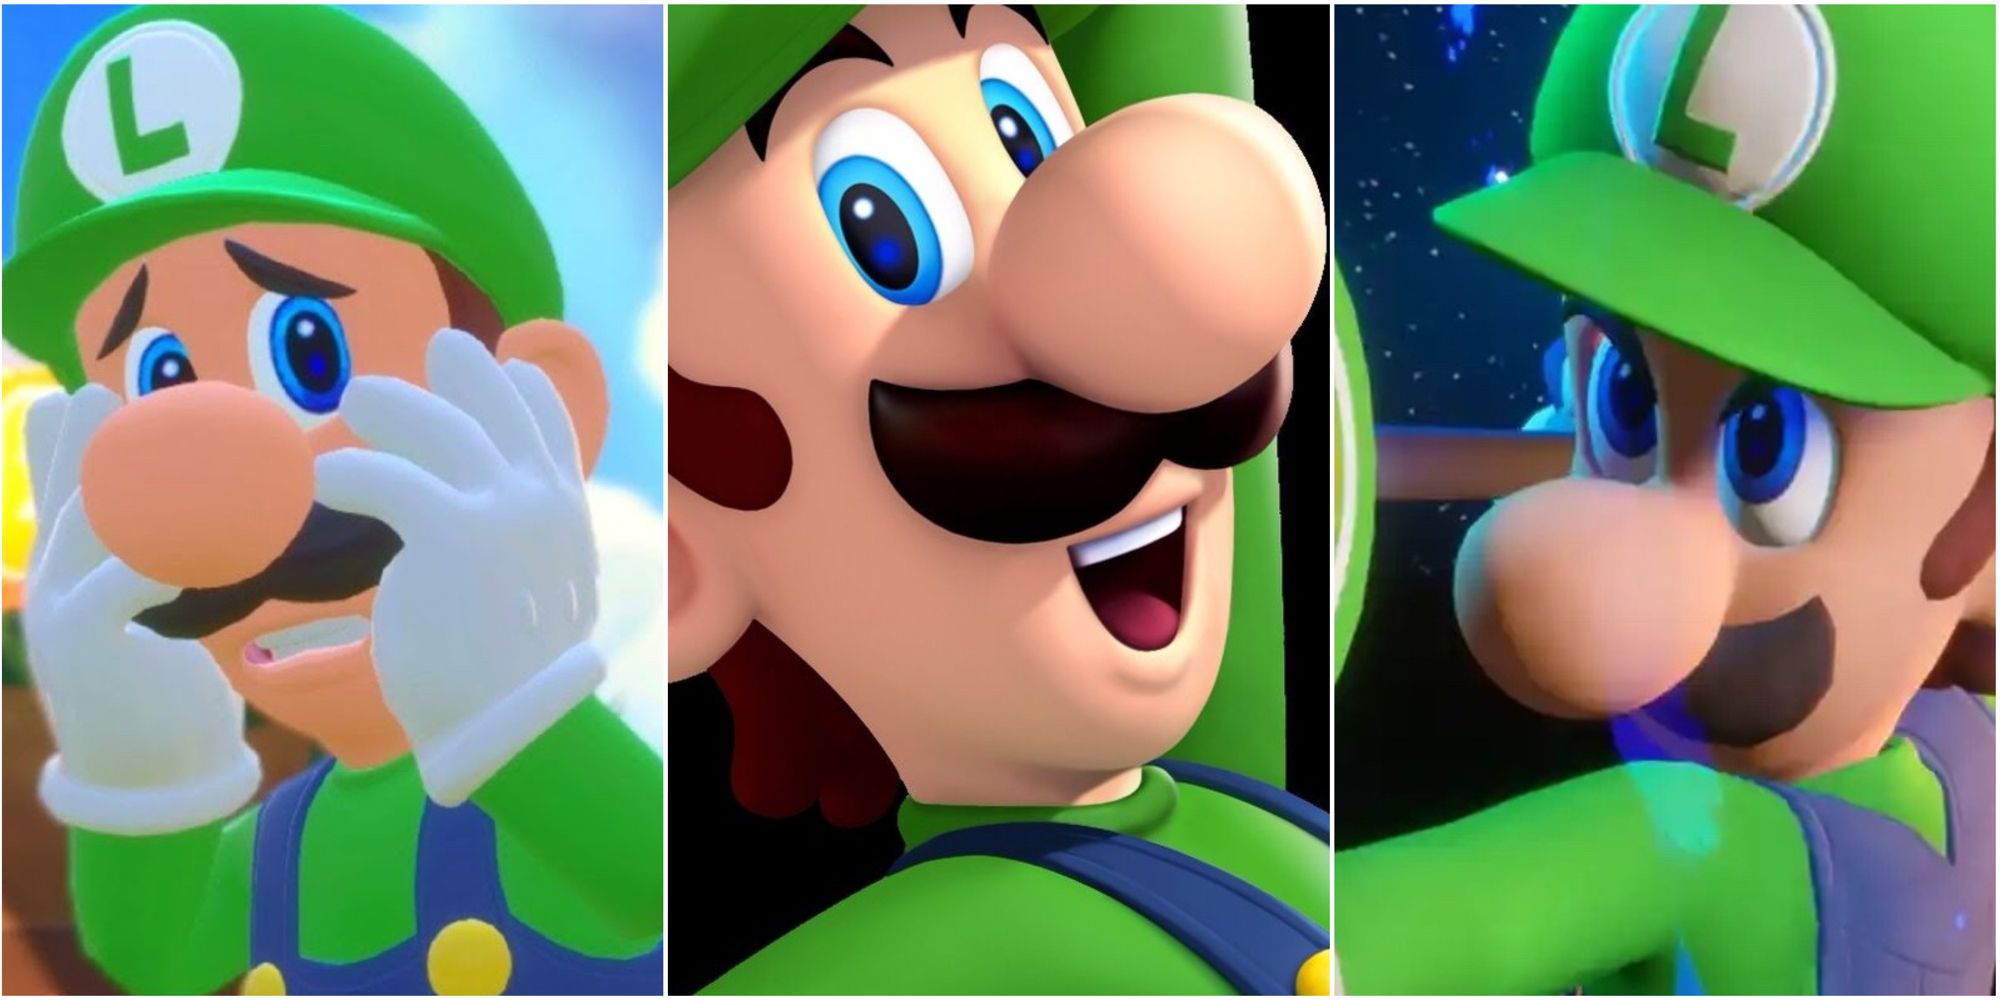 Three different images of Luigi from Mario + Rabbids: Sparks of Hope